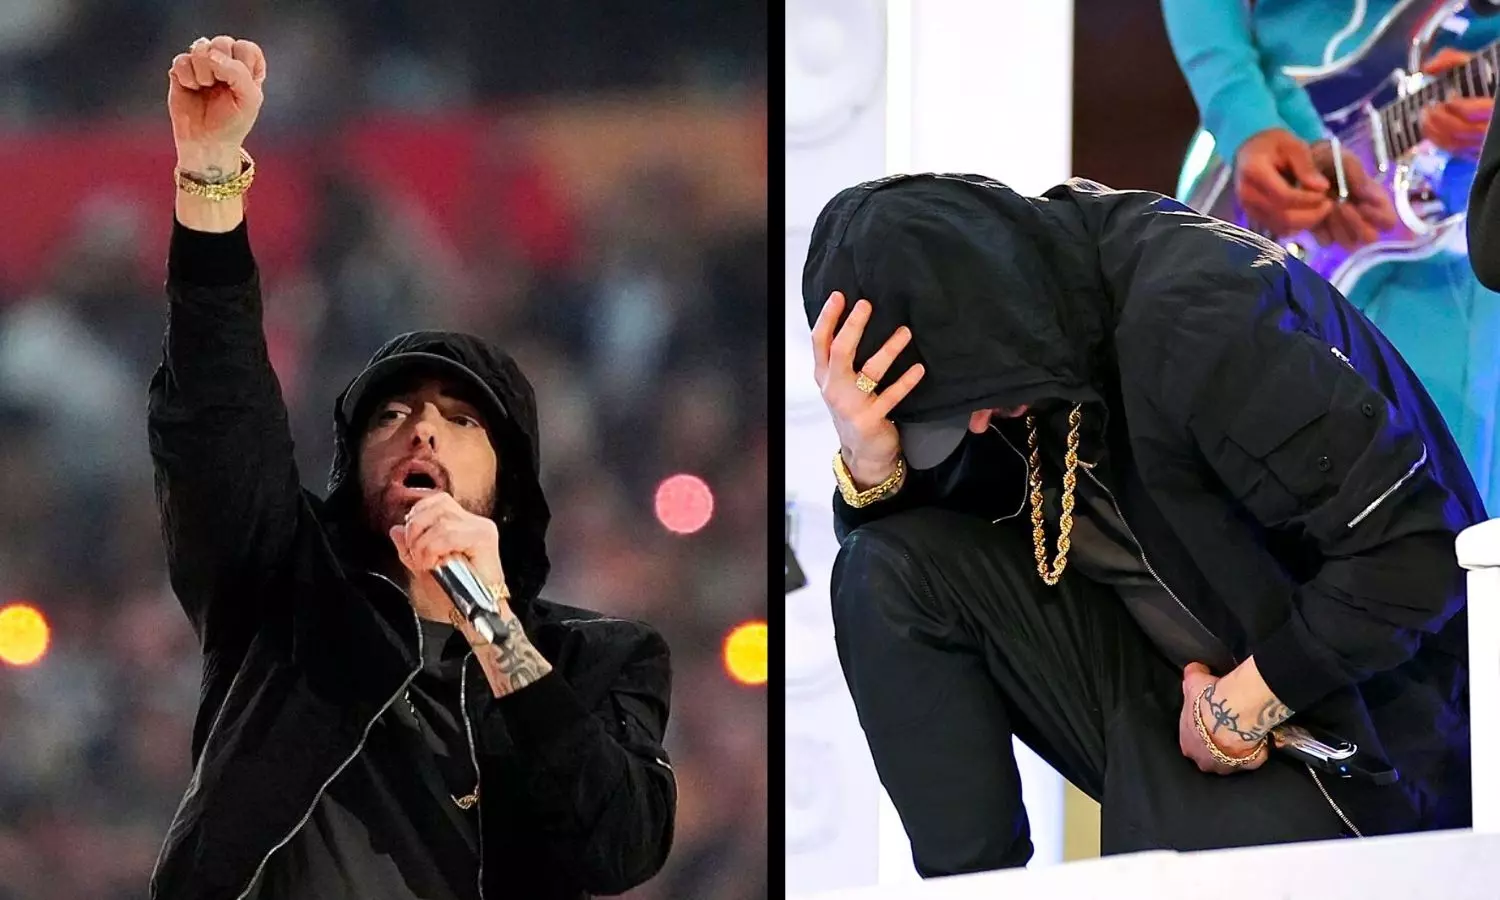 WATCH: Eminem takes the knee in protest during NFL Super Bowl